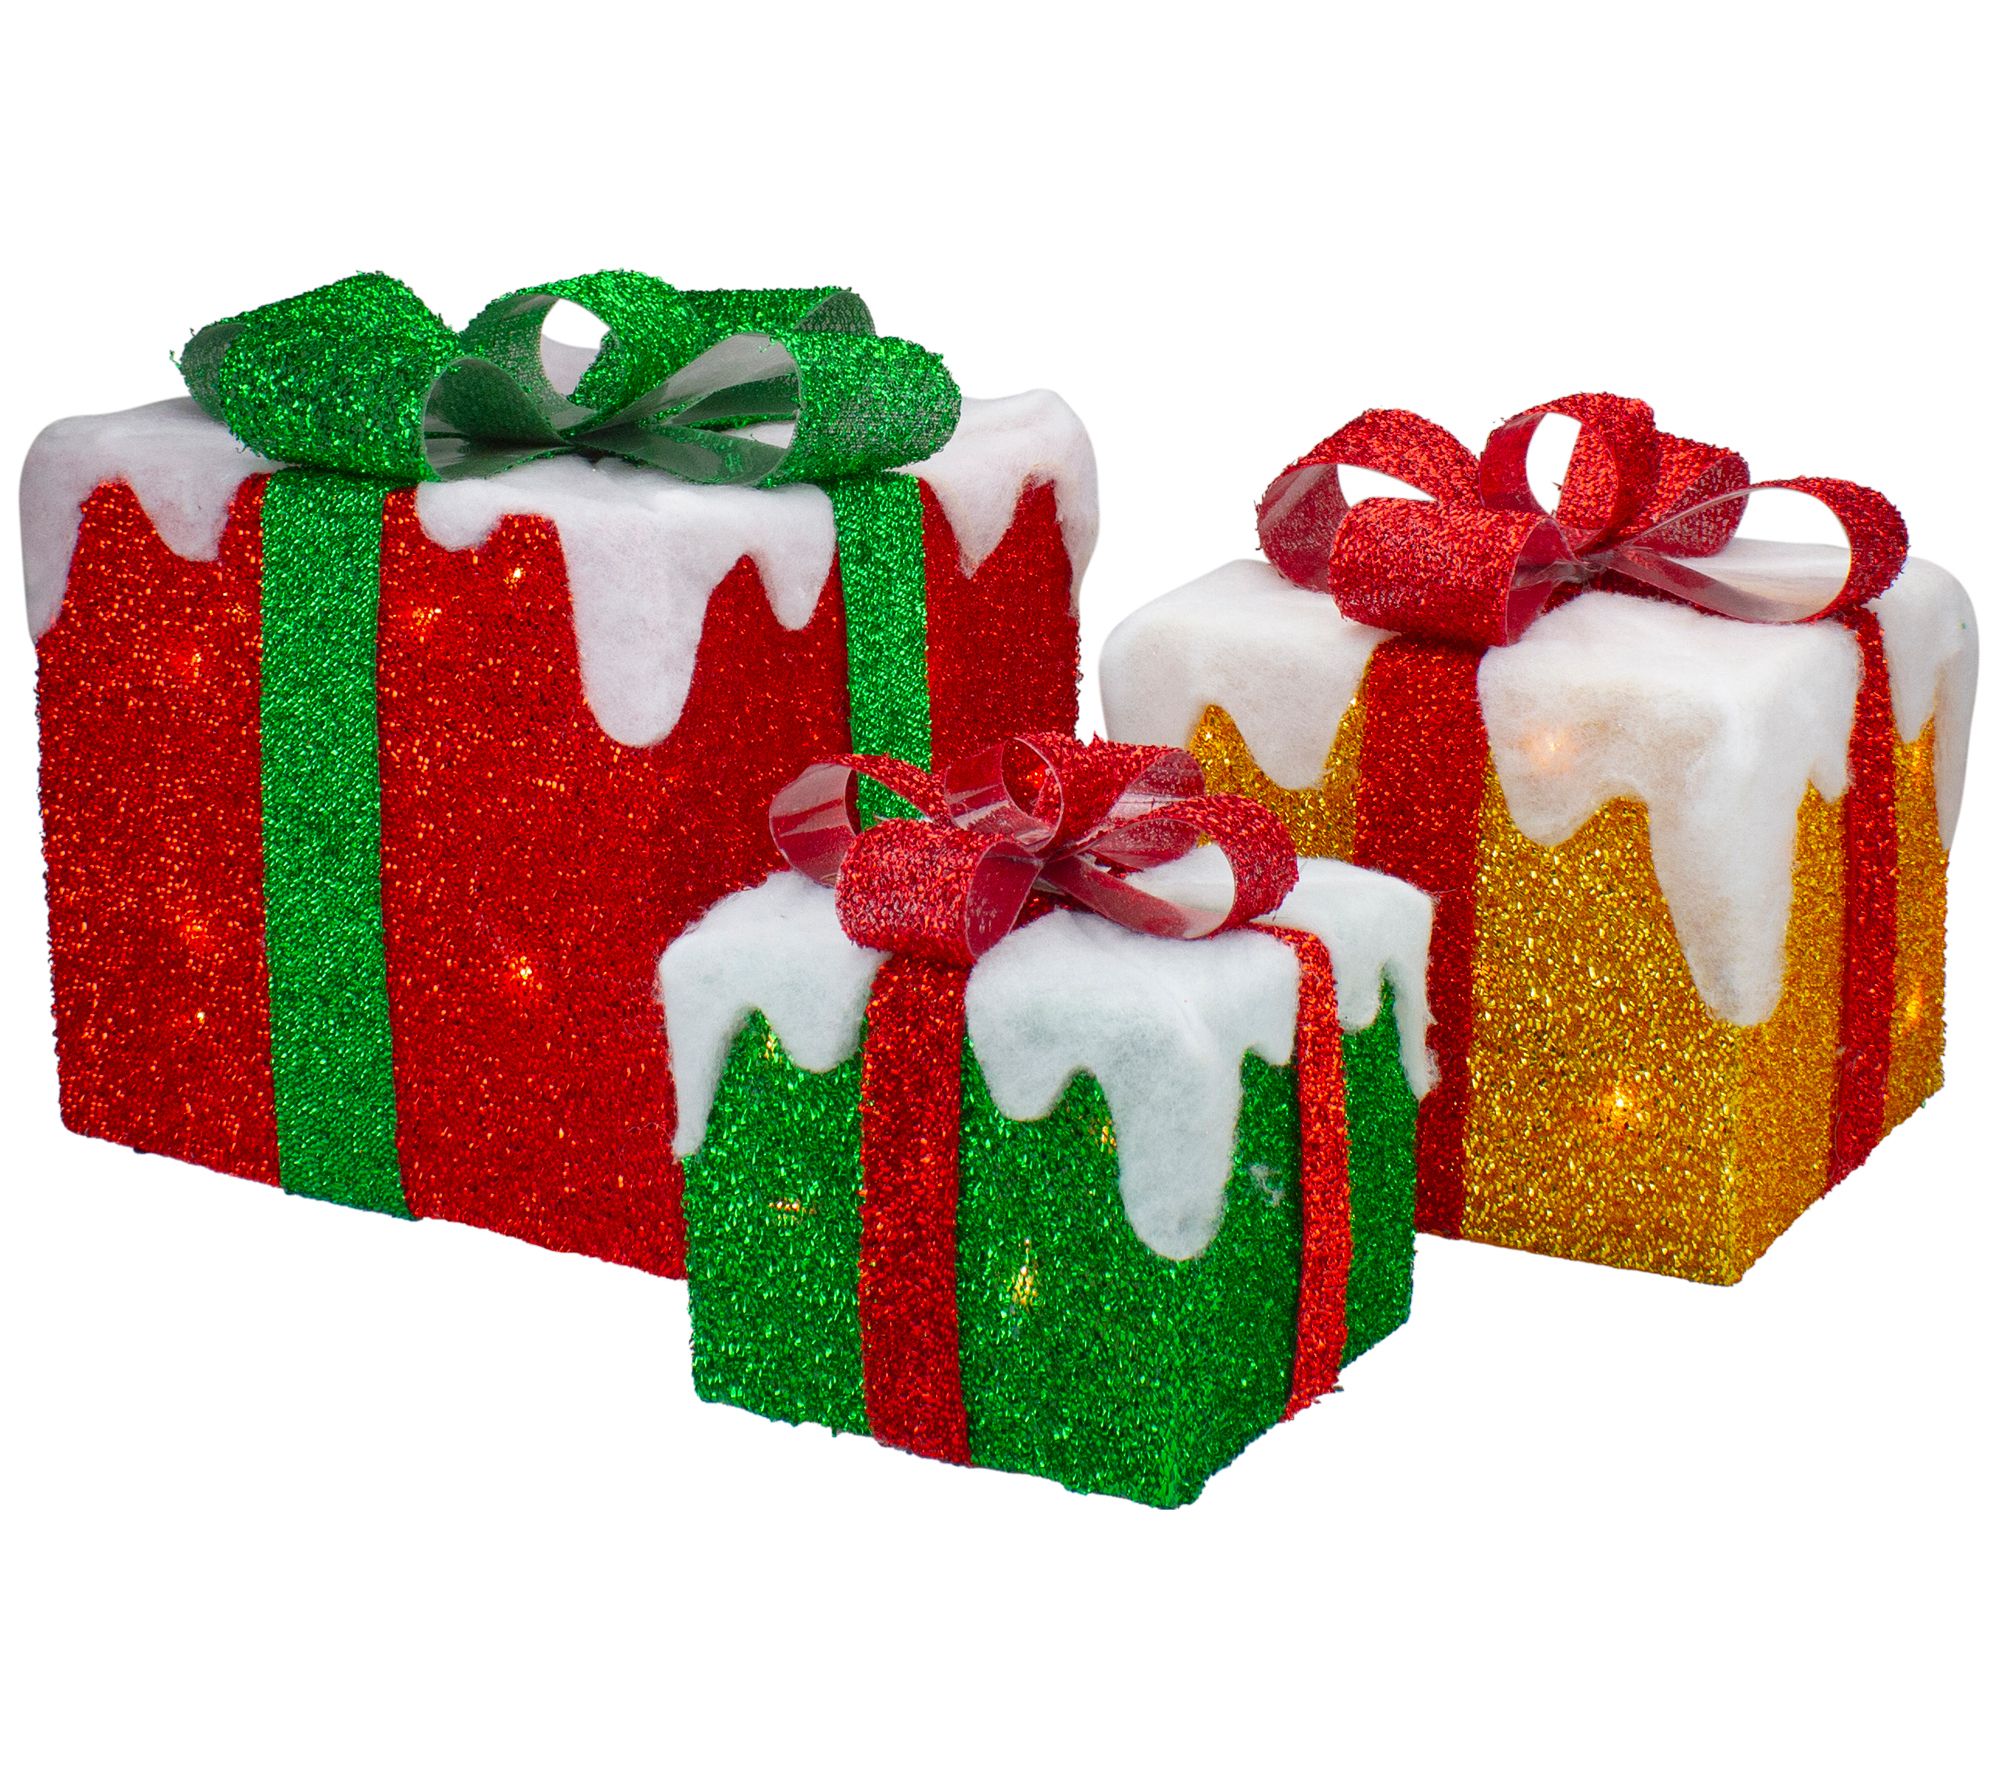 Northlight Set of 3 Green Gold and Red Gift Box es Decorations - QVC.com